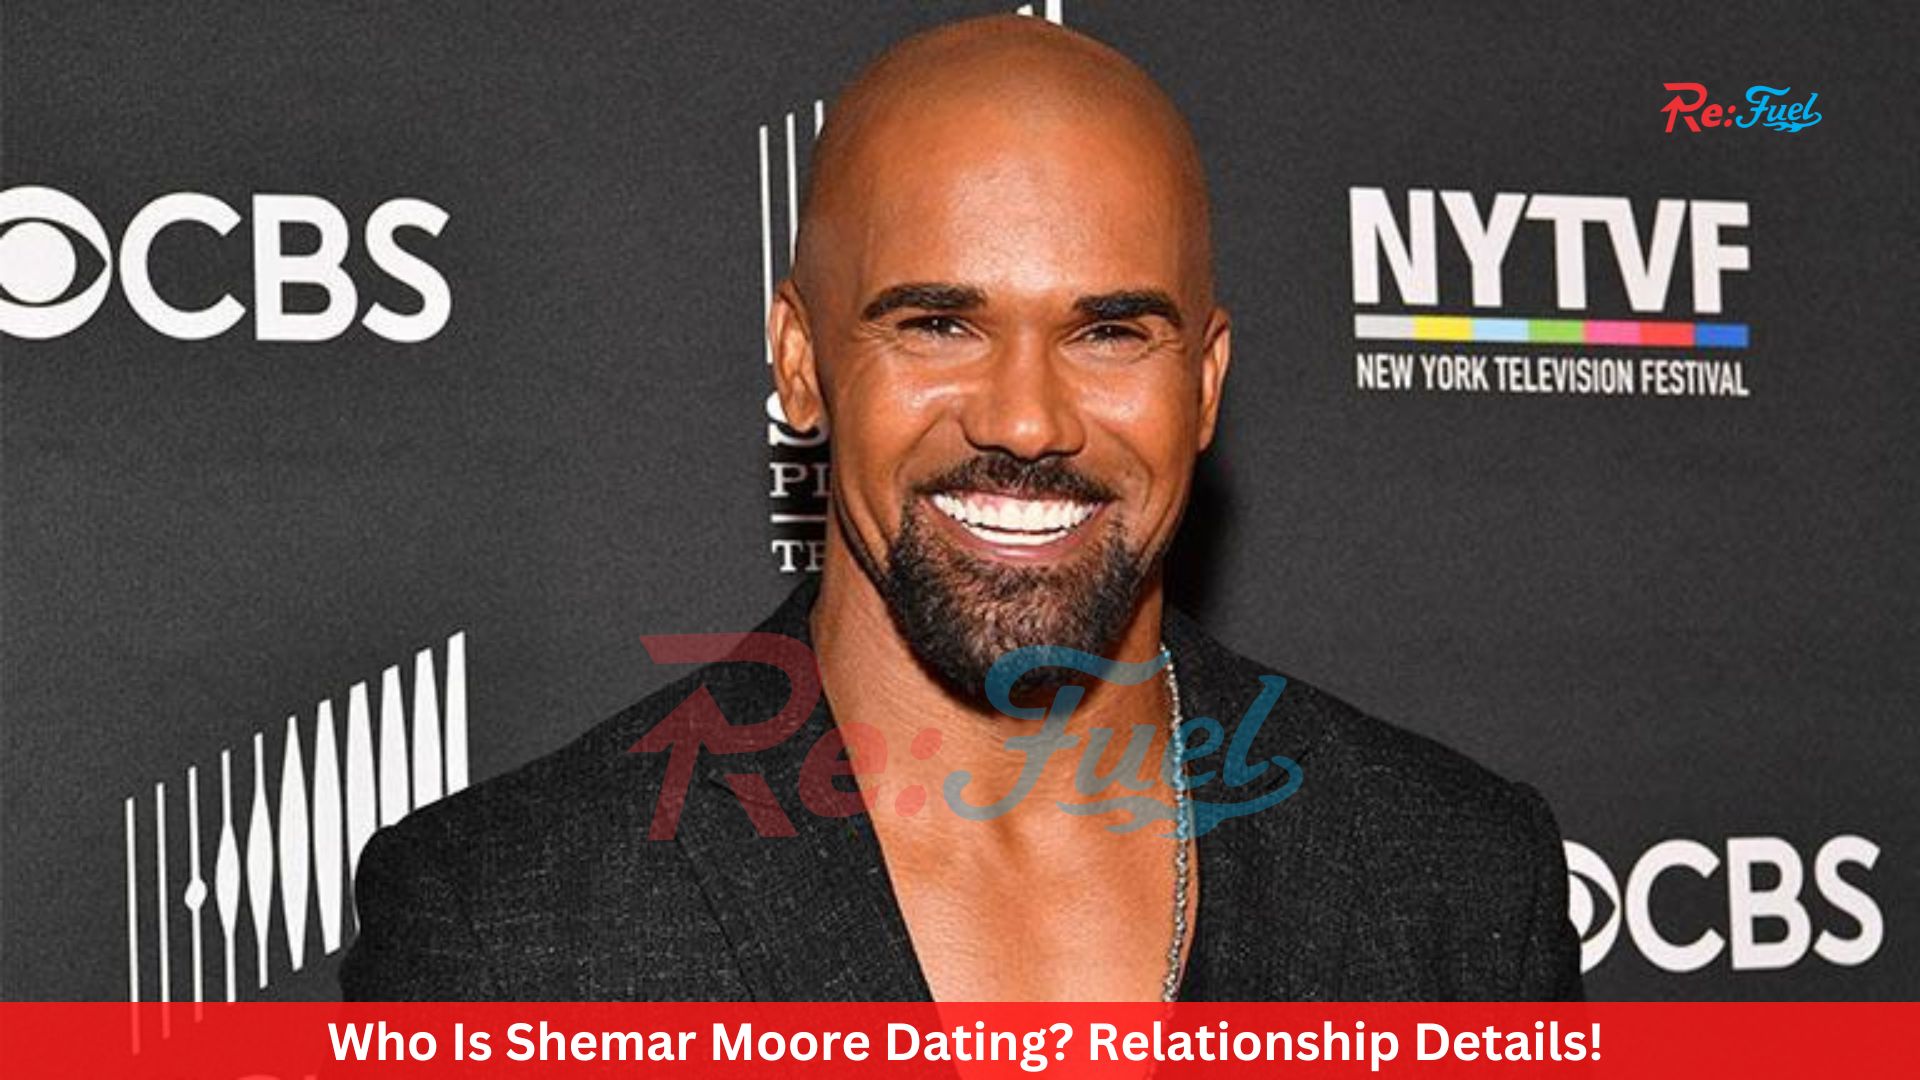 Who Is Shemar Moore Dating? Relationship Details!